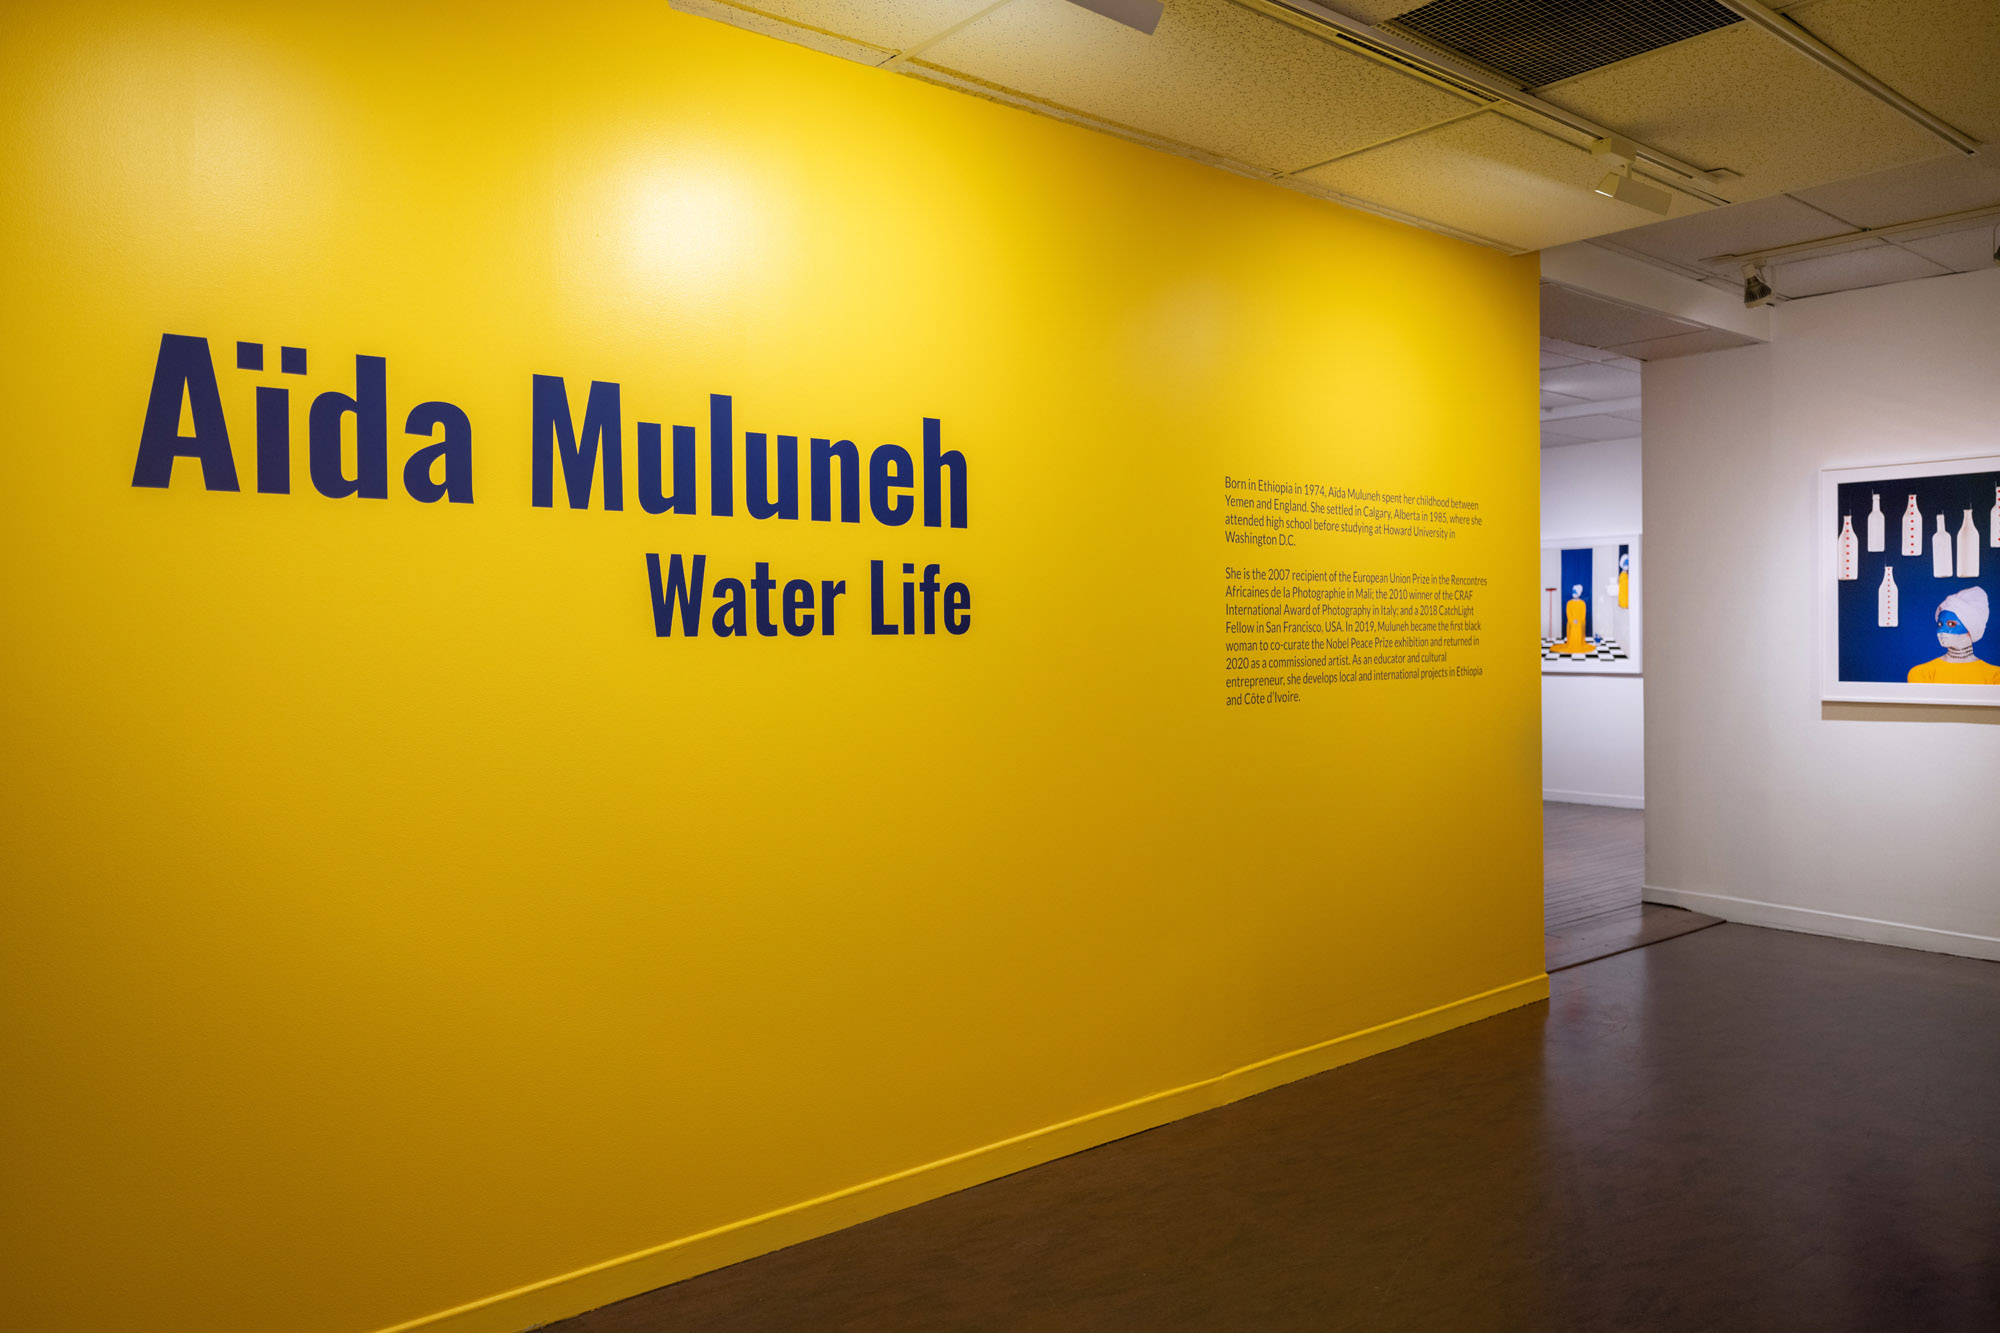     Aïda Muluneh, Water Life, installation view, Textile Museum of Canada, 2022. Courtesy of the artist and Textile Museum of Canada. Photo by Daren Rigo

